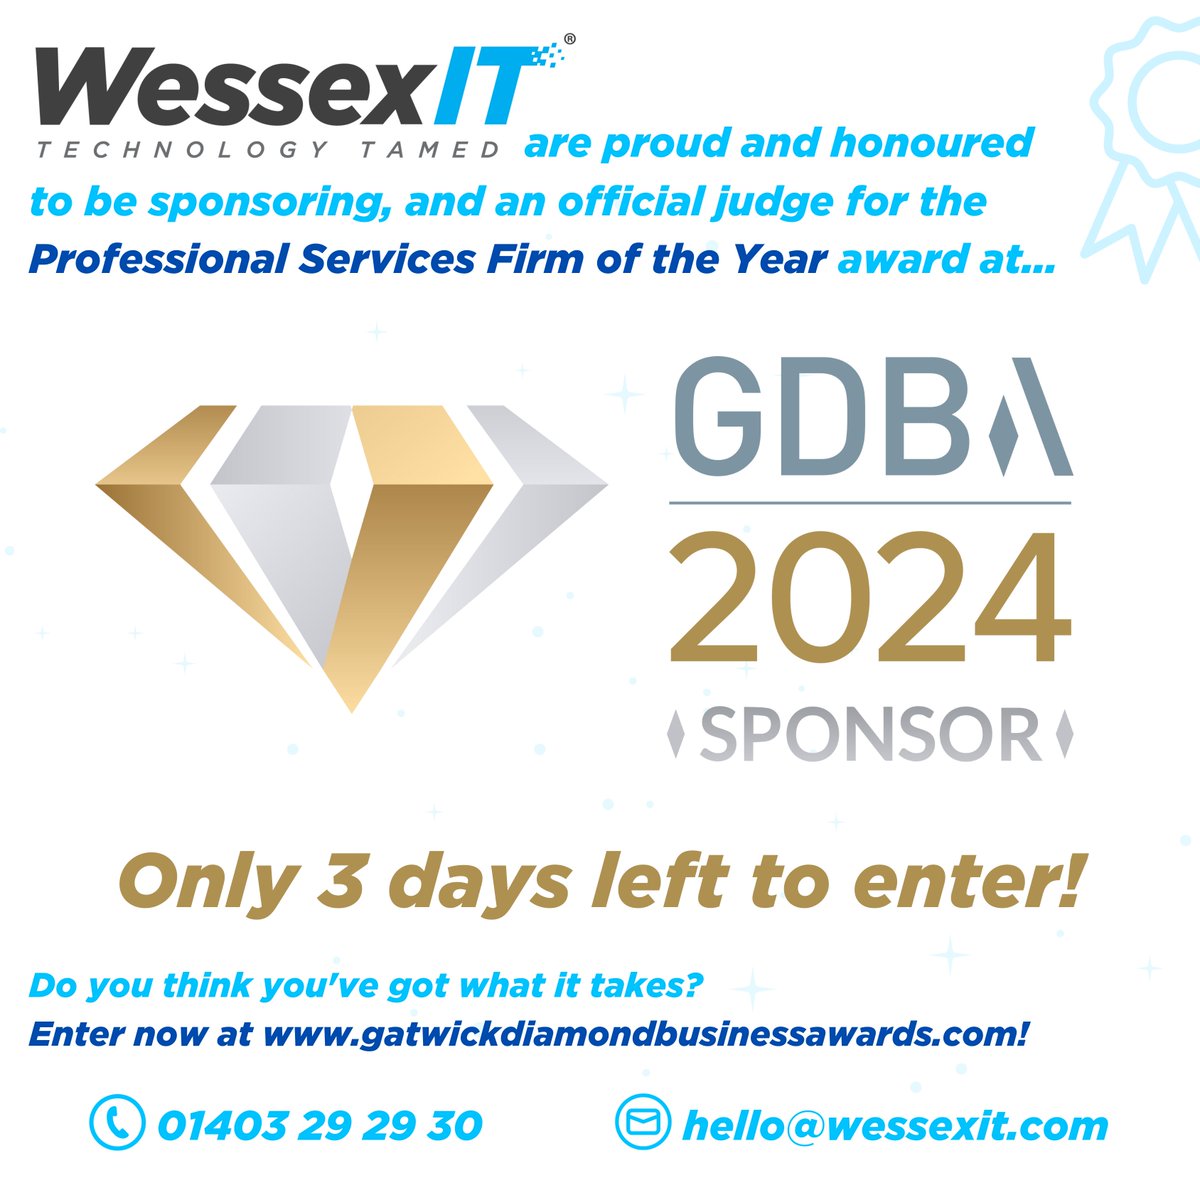 Go to the @GDBMembership Awards 2024 website below to enter! 👇 You only have 3 days left! 🚨 gatwickdiamondbusinessawards.com #GDB #GDBA #GDBA2024 #GDBAwards #ITSupport #ITSupportWestSussex #WestSussex #ITSupportSussex #Sussex #MSP #EndpointProtection #Cybersecurity #ITSecurity